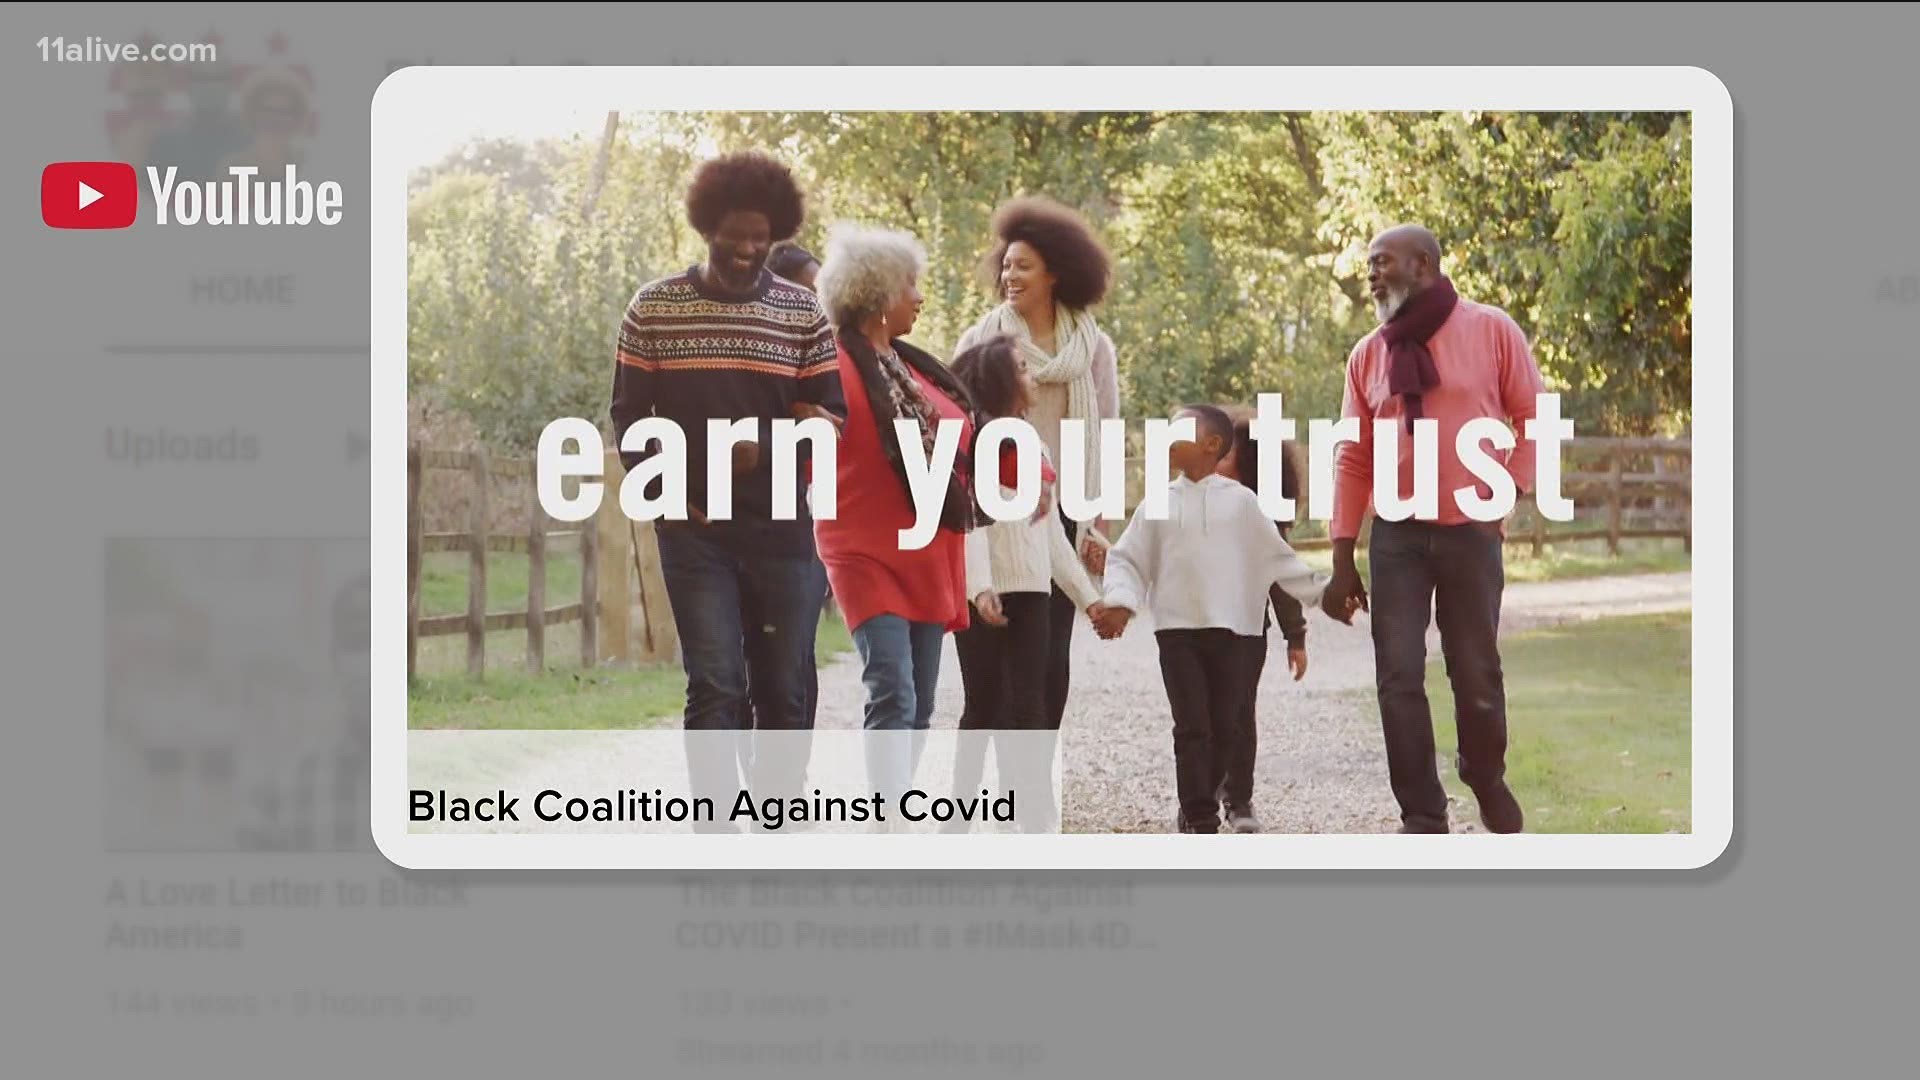 COVID-19 has disproportionately impacted people of color. The message wants Black Americans to know they do have representation at the table.